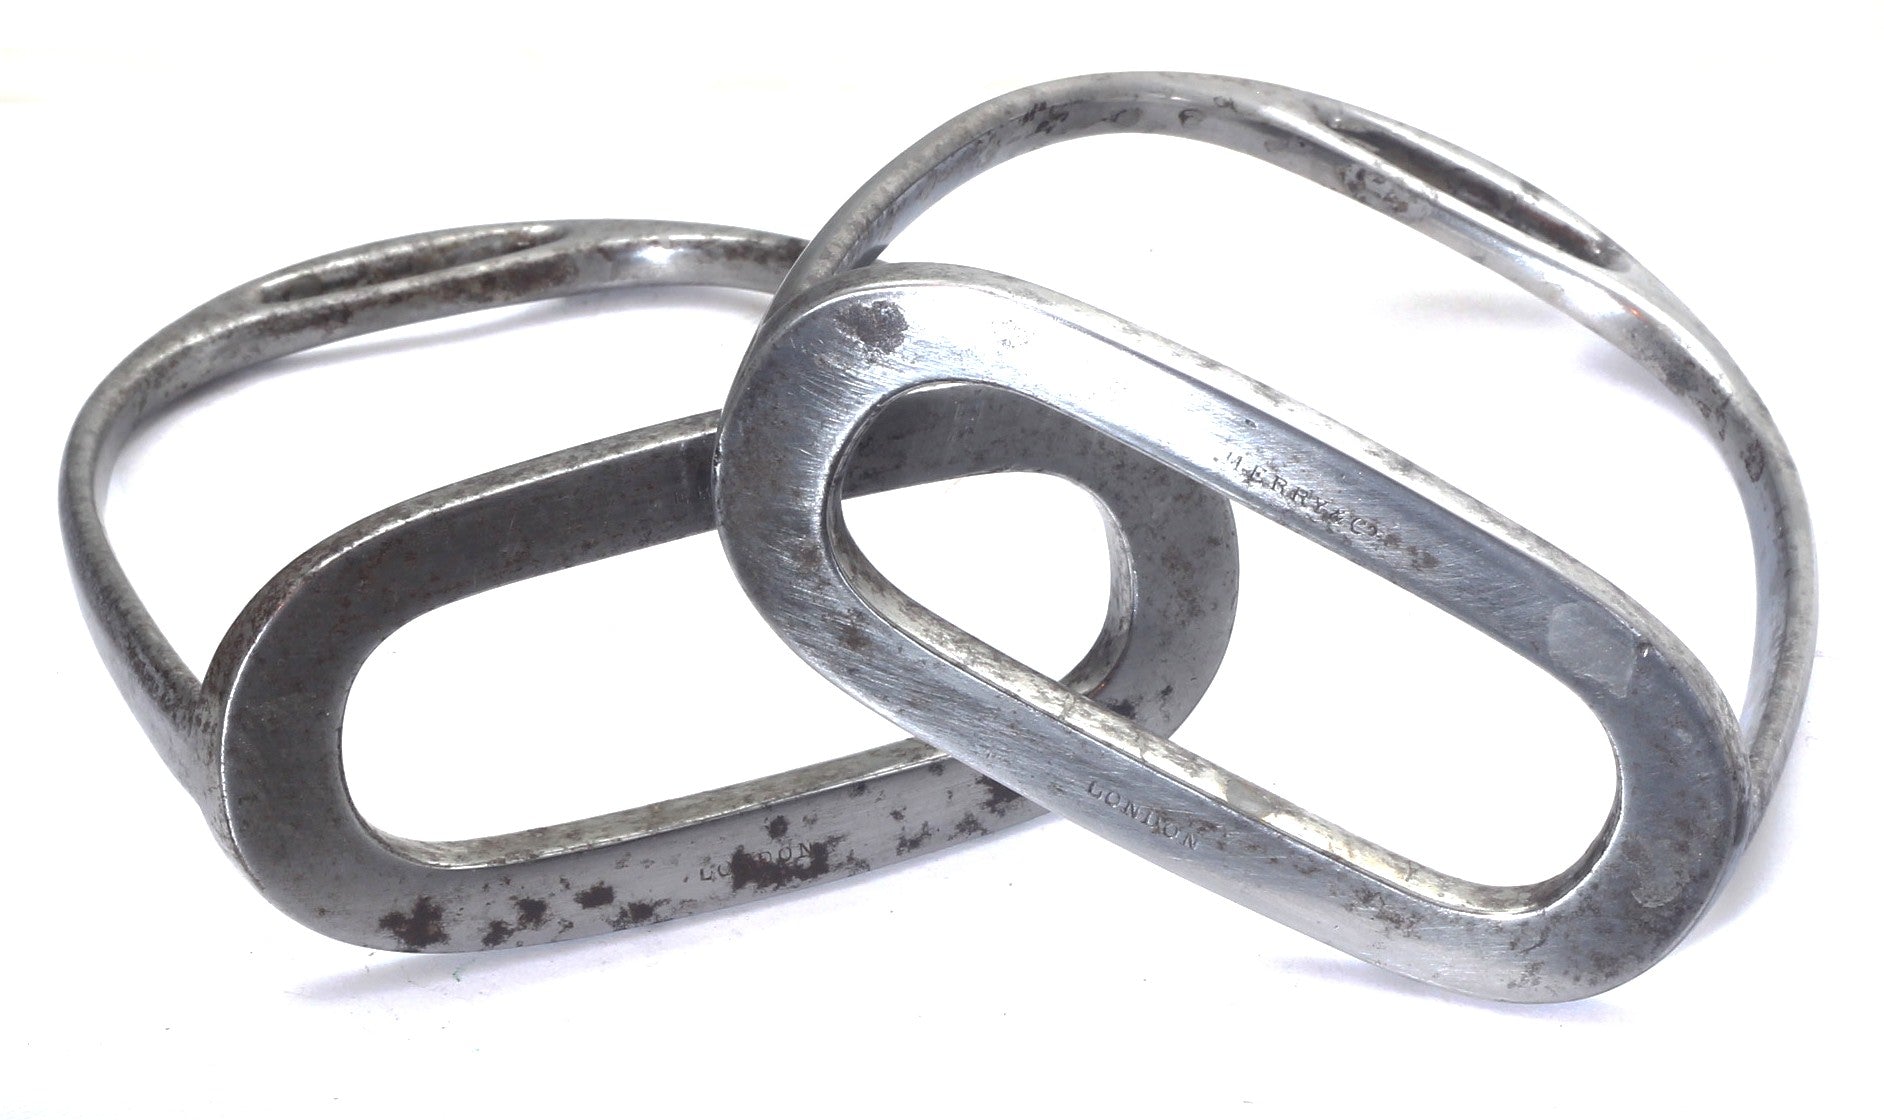 A Pair of Antique Steel Stirrups by Merry of St James